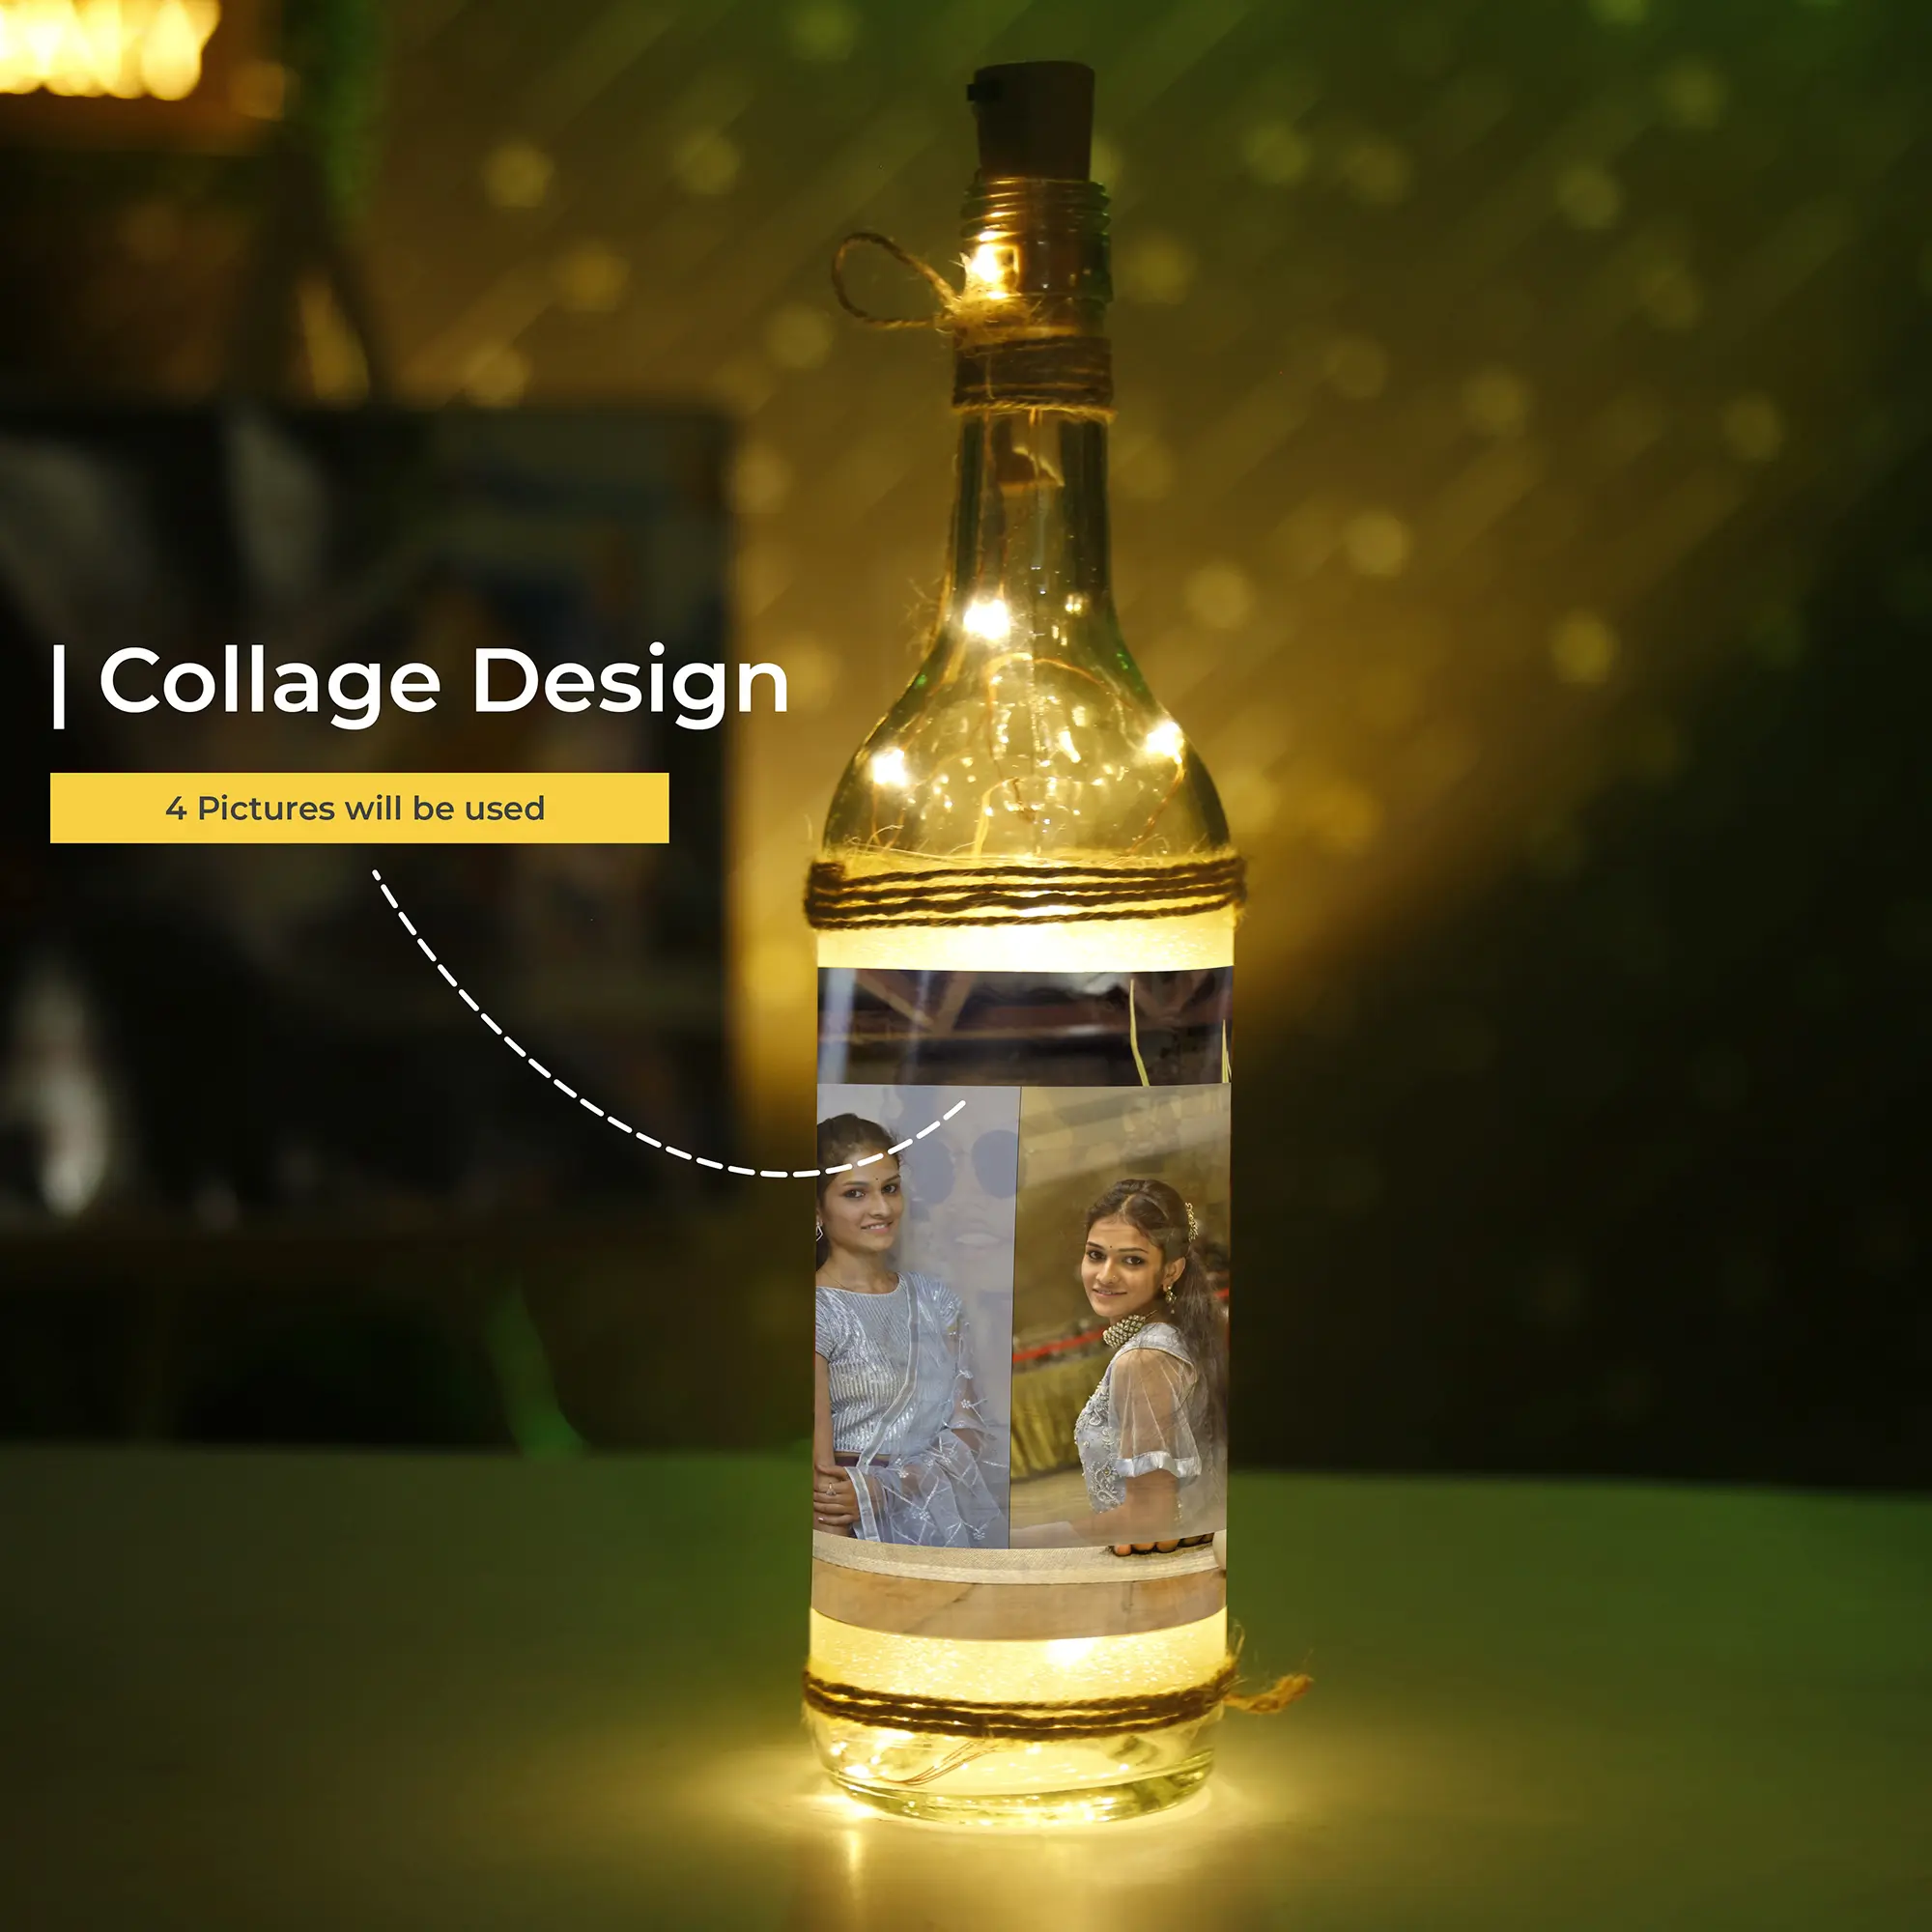 Personalized Birthday gifts - hand-painted glass bottles with LED lights